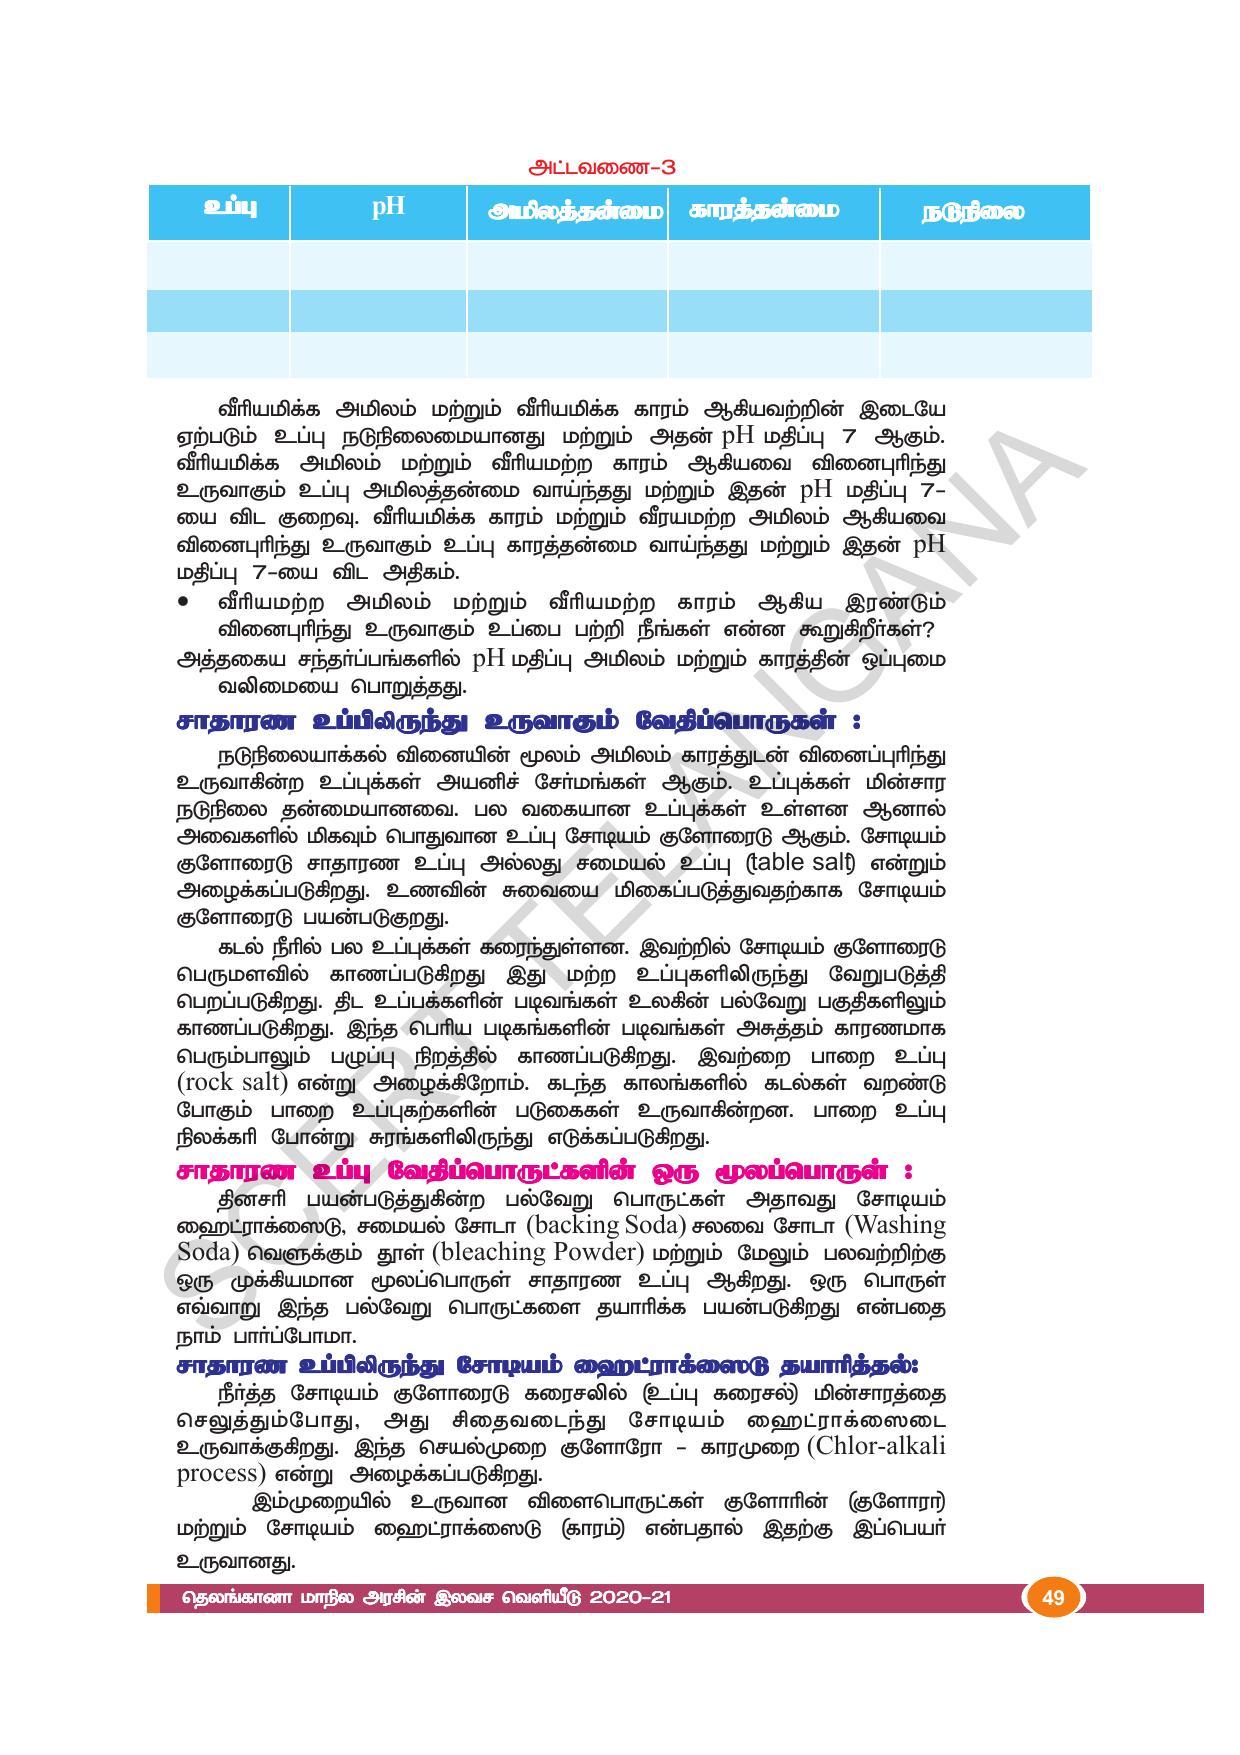 TS SCERT Class 10 Physical Science(Tamil Medium) Text Book - Page 61